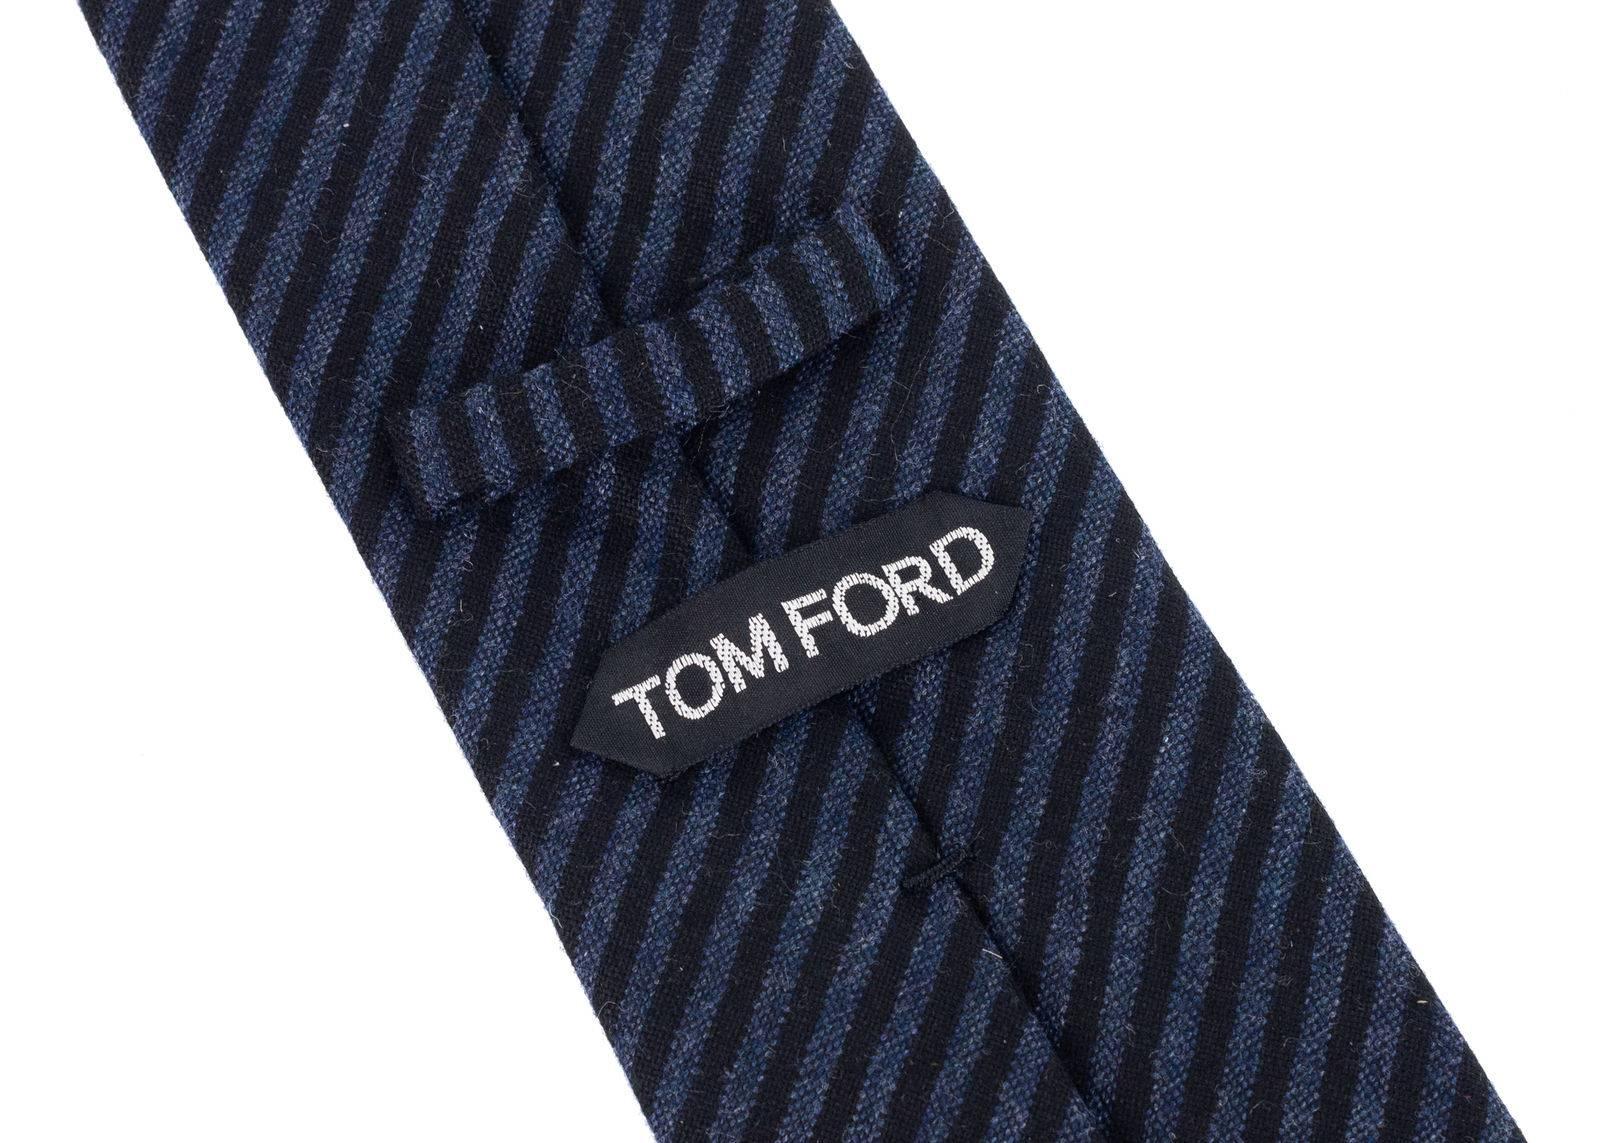 Italian luxury brand, Tom Ford, has crafted these gorgeous Cashmere Blend Tie for important special occasions and professional events. The tie is great to pair with your favorite solid color button down and blazers with your chosen pair or classic